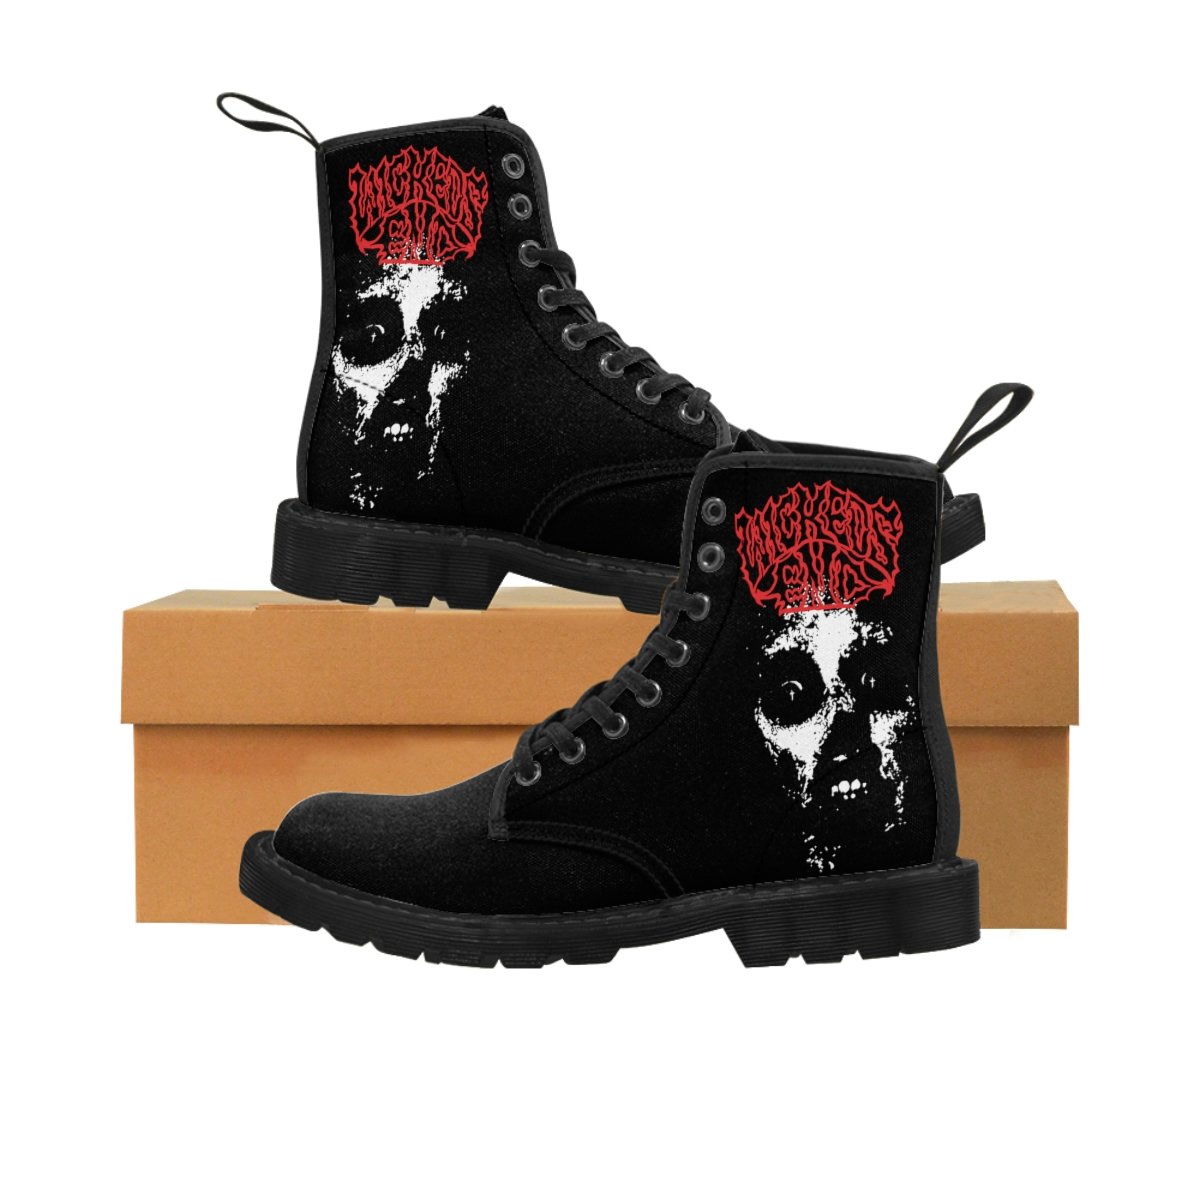 Wickeds End – Zombie Girl Women’s Canvas Boots